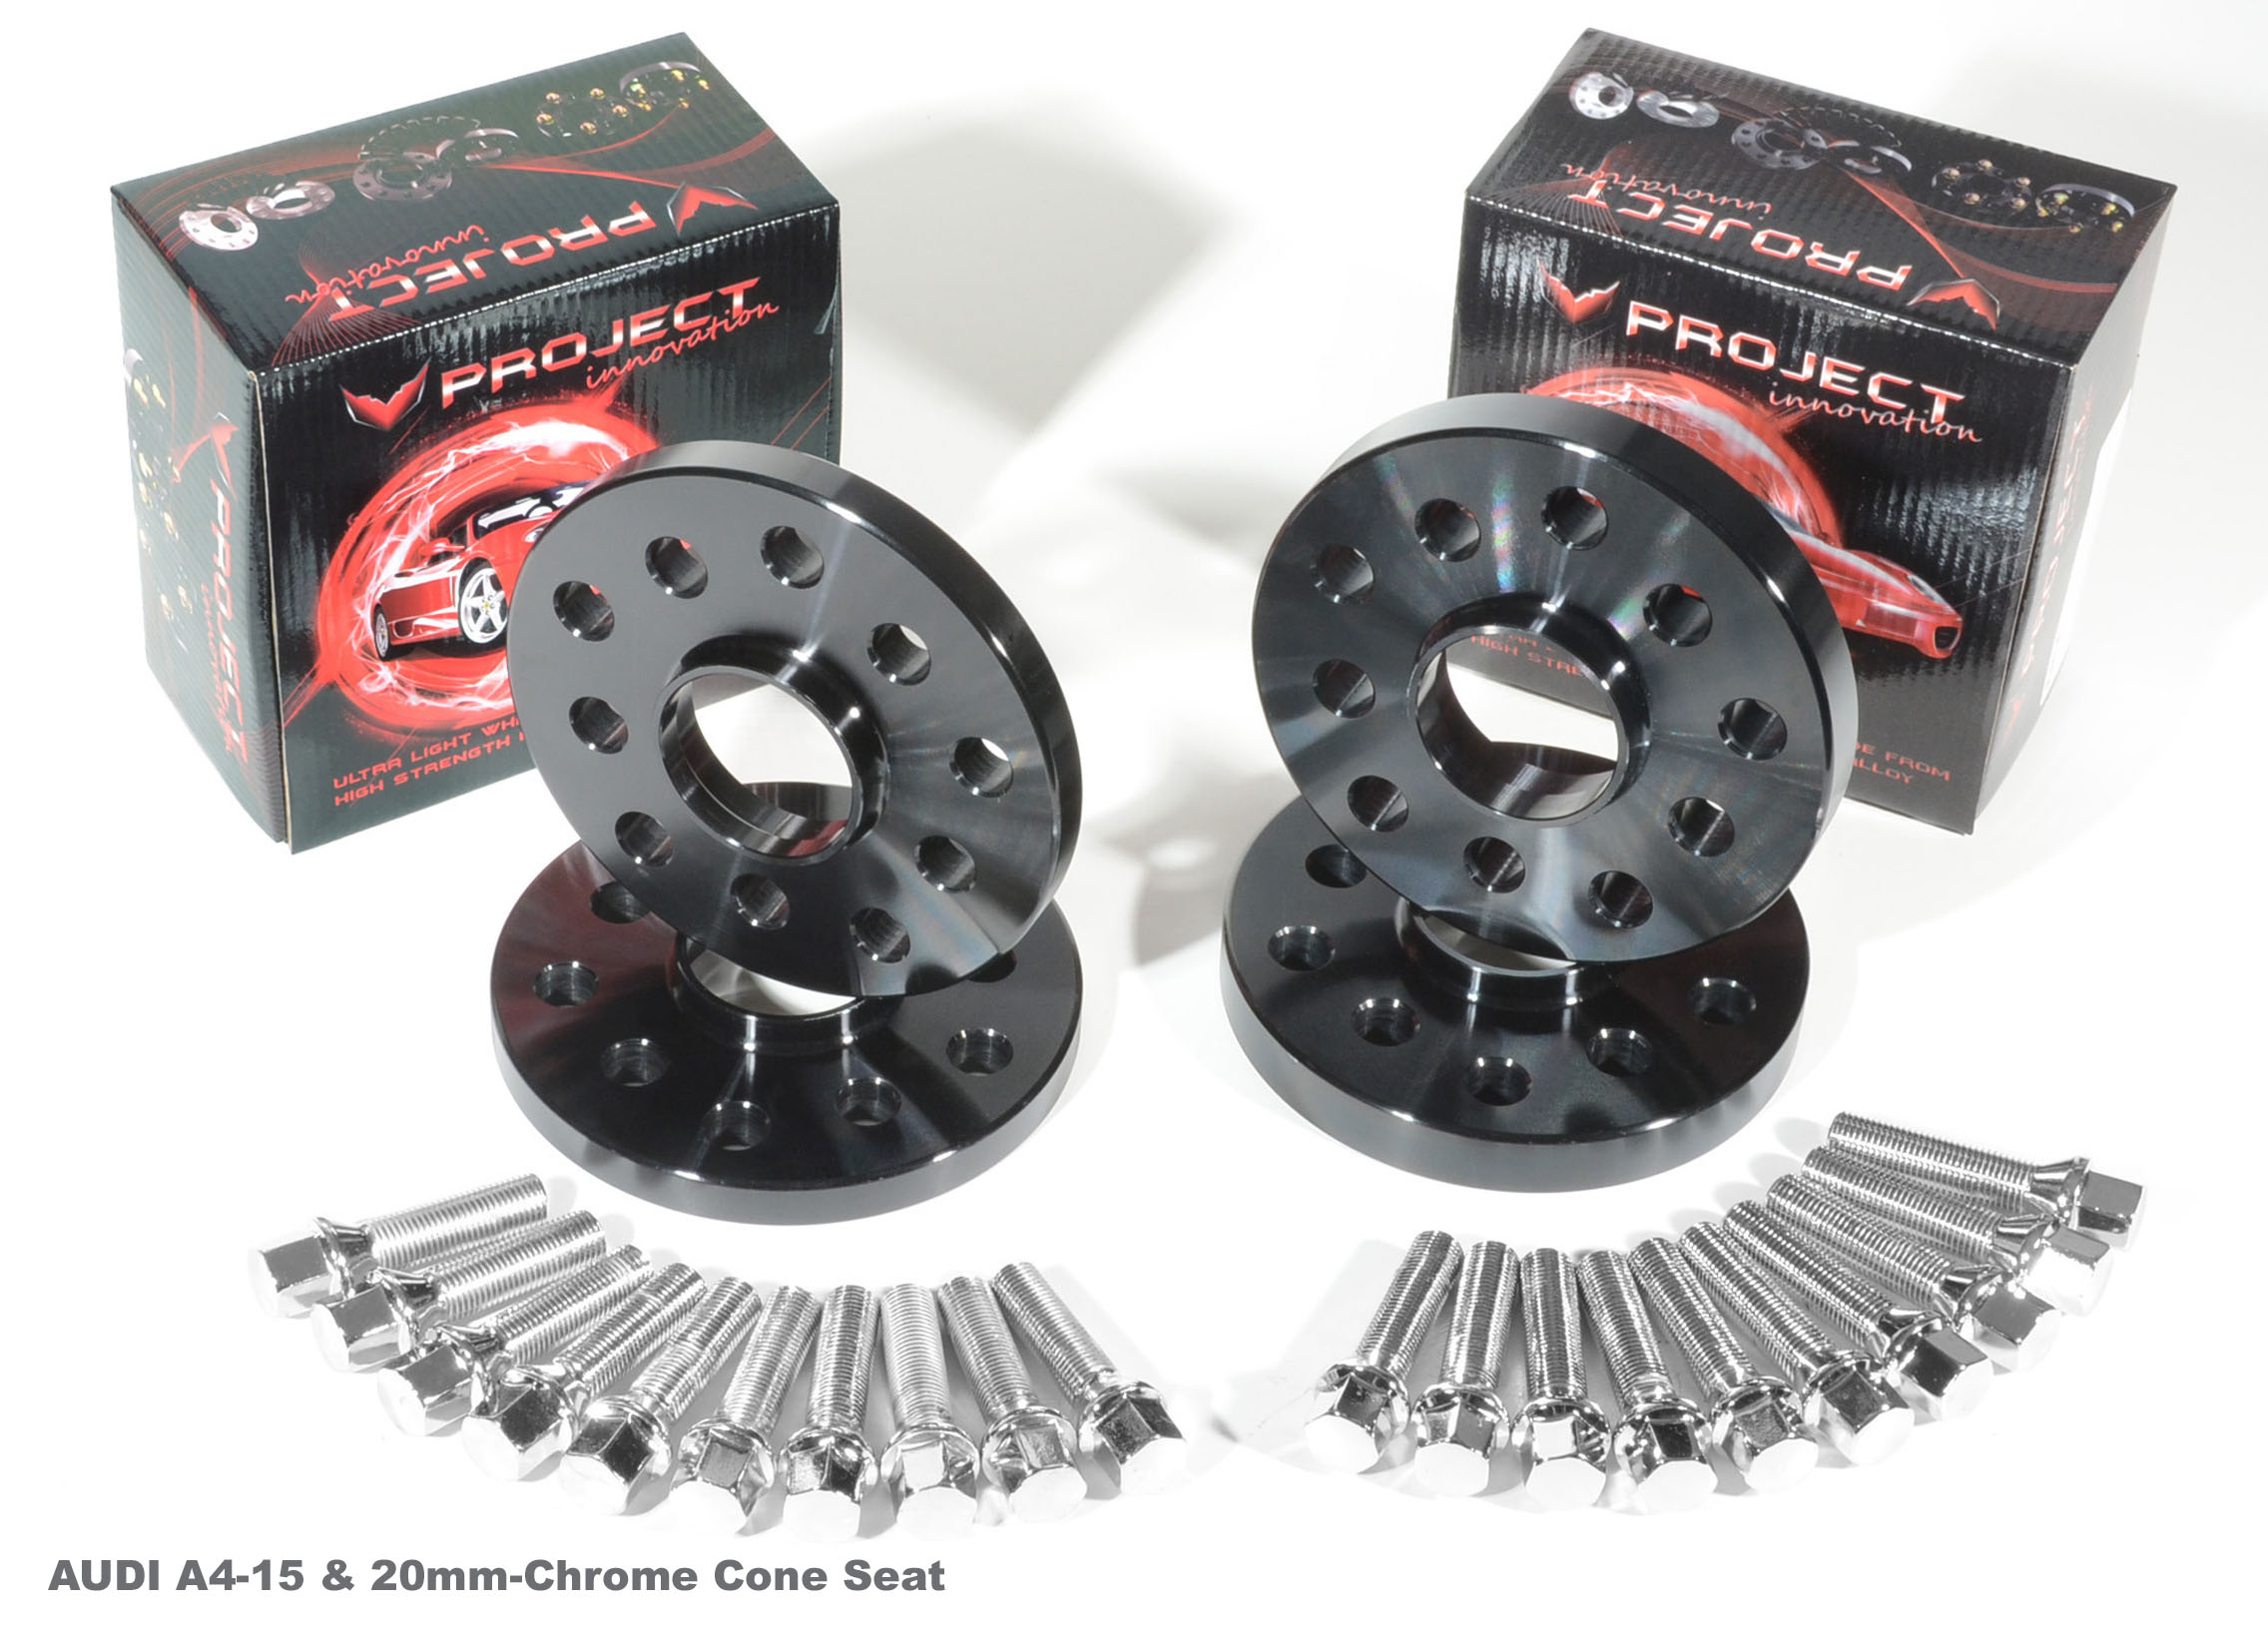 4PHS21115 2 Pairs of Hubcentric 20mm Alloy Wheel Spacers for Àudi A6 Part No